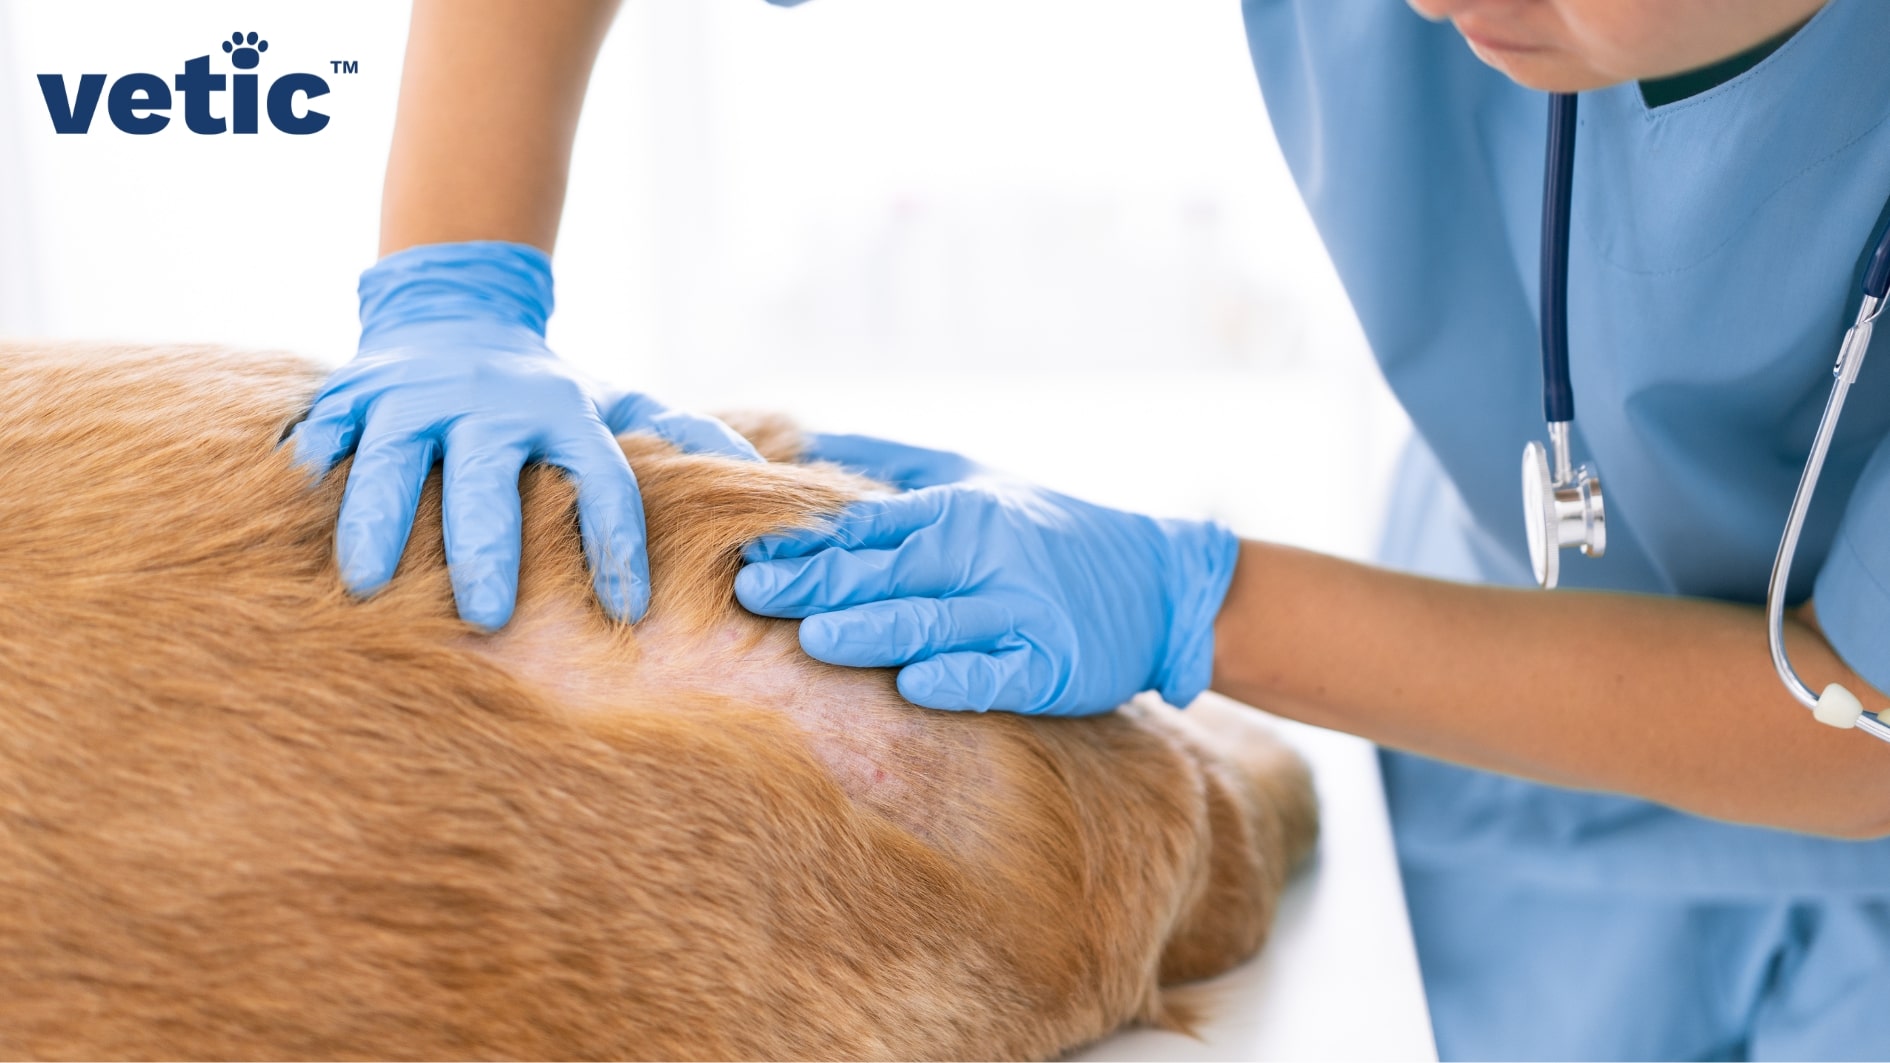 Veterinarian in blue scrubs and blue gloves parting the hair of a short-haired adult dog of indecipherable breed to reveal red, splotchy and irritated skin.